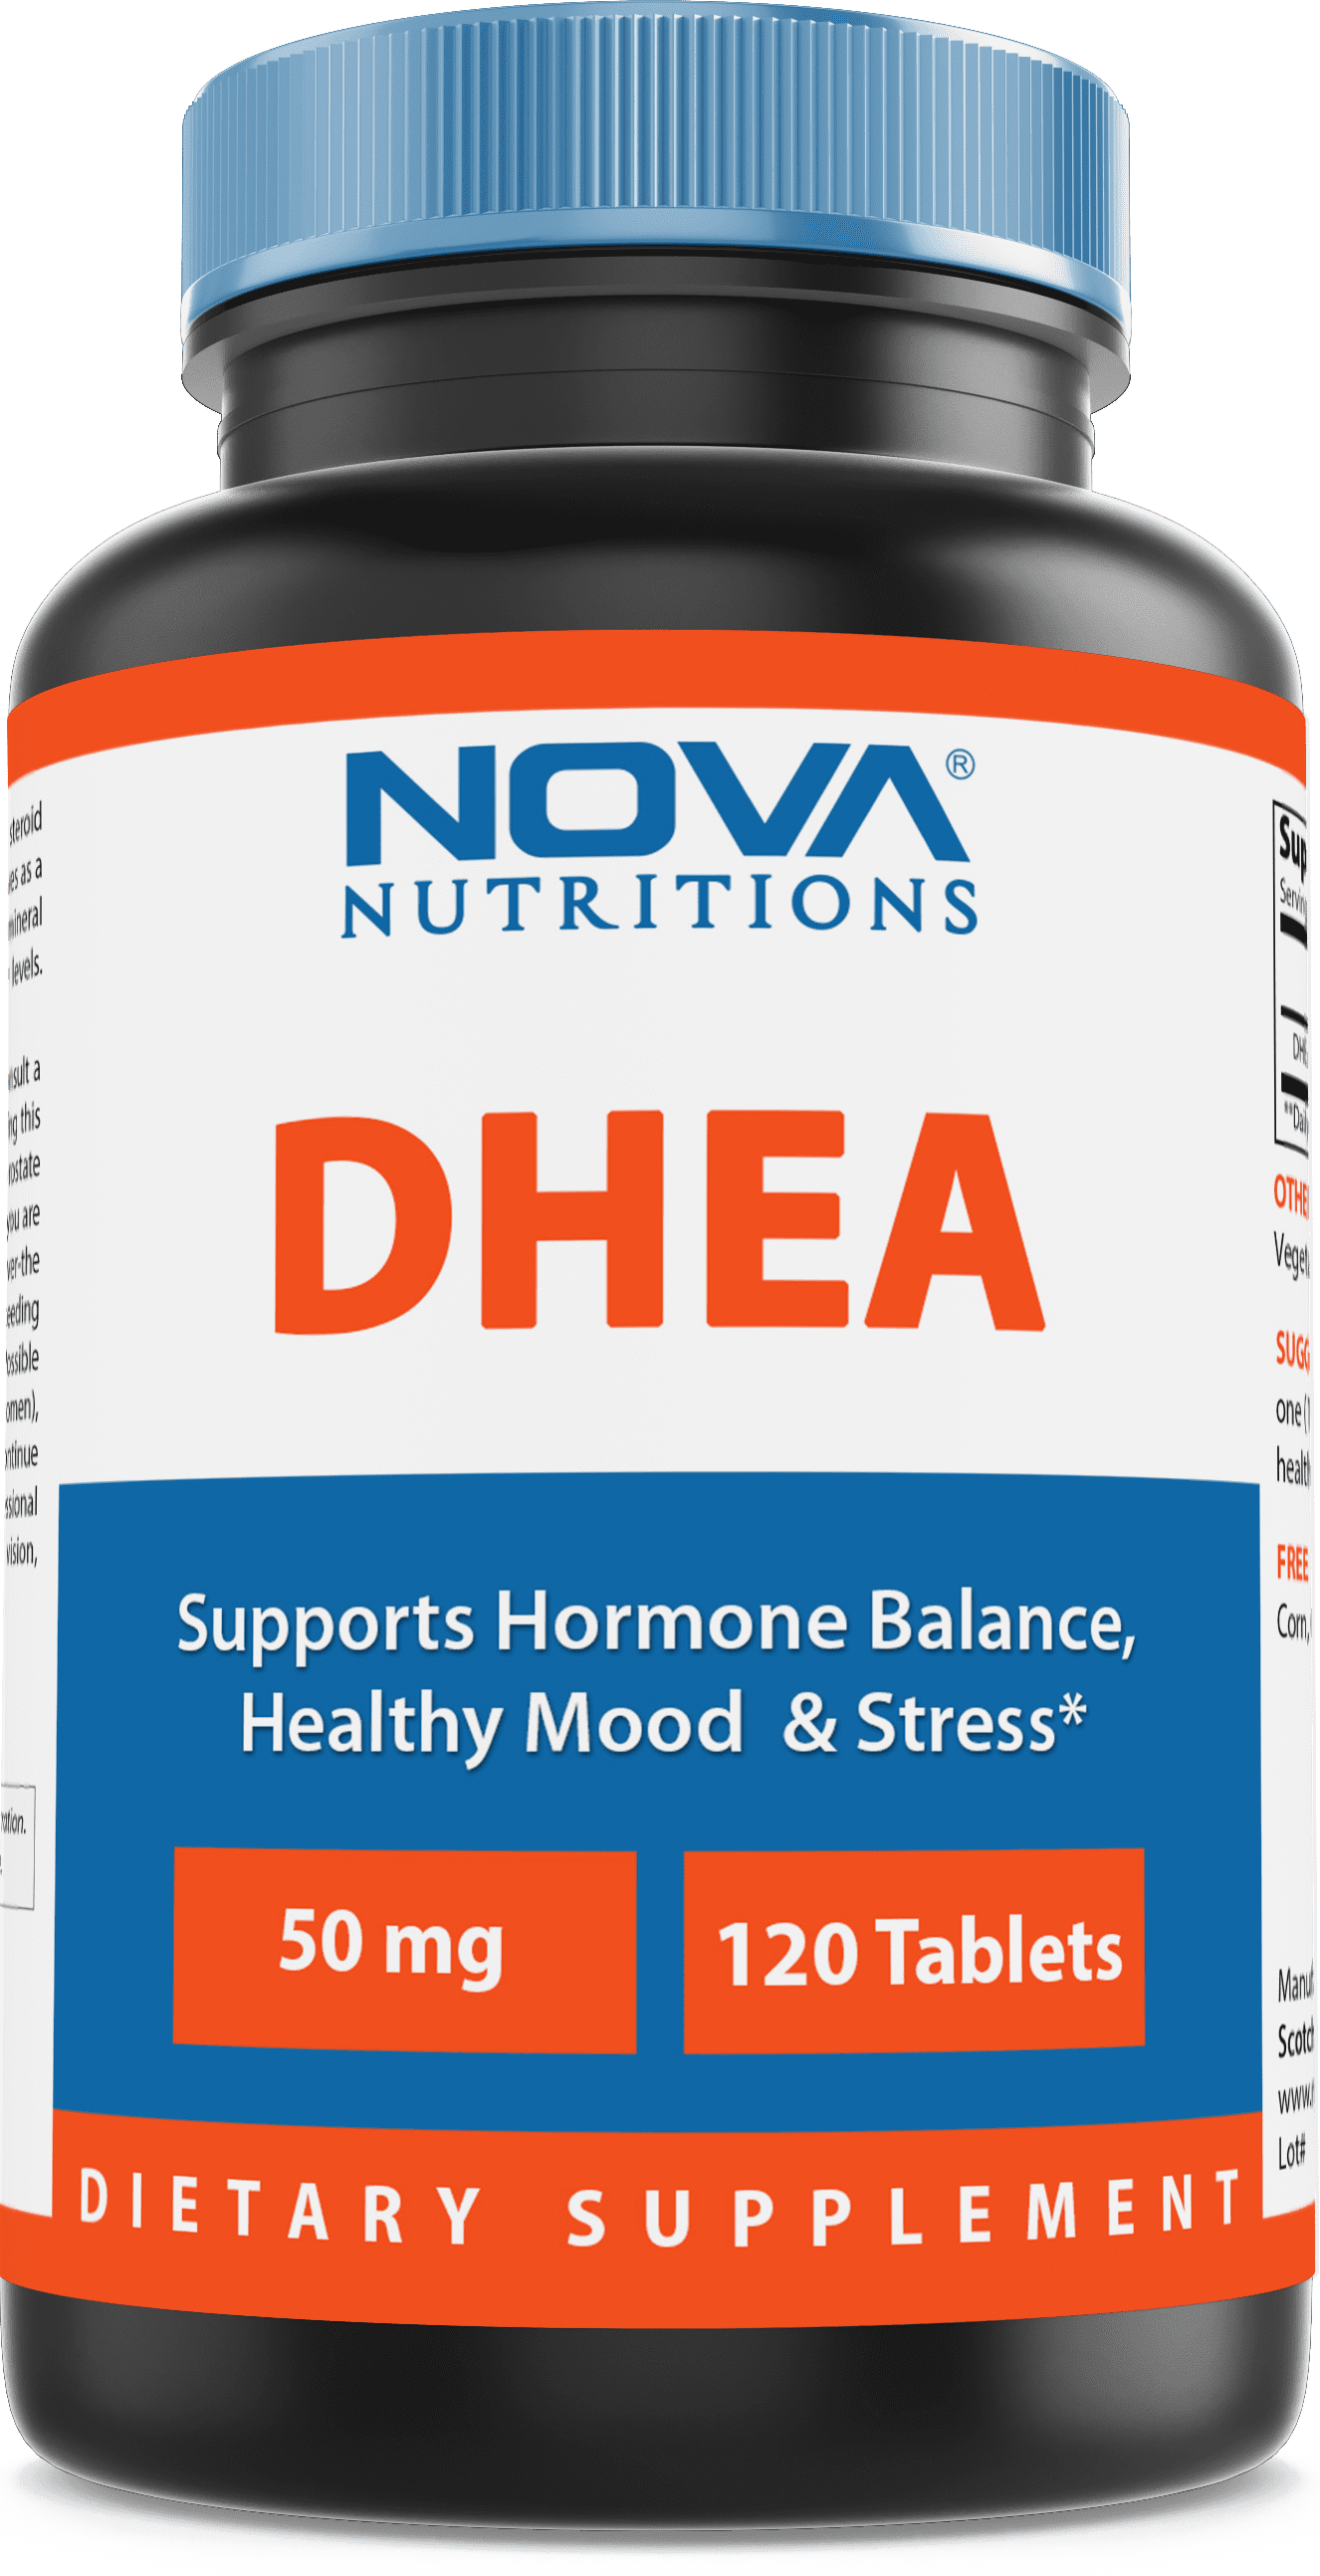 Nova Nutritions Dhea 50mg Supplement 120 Tablets Supports Balanced Hormone Levels For Men